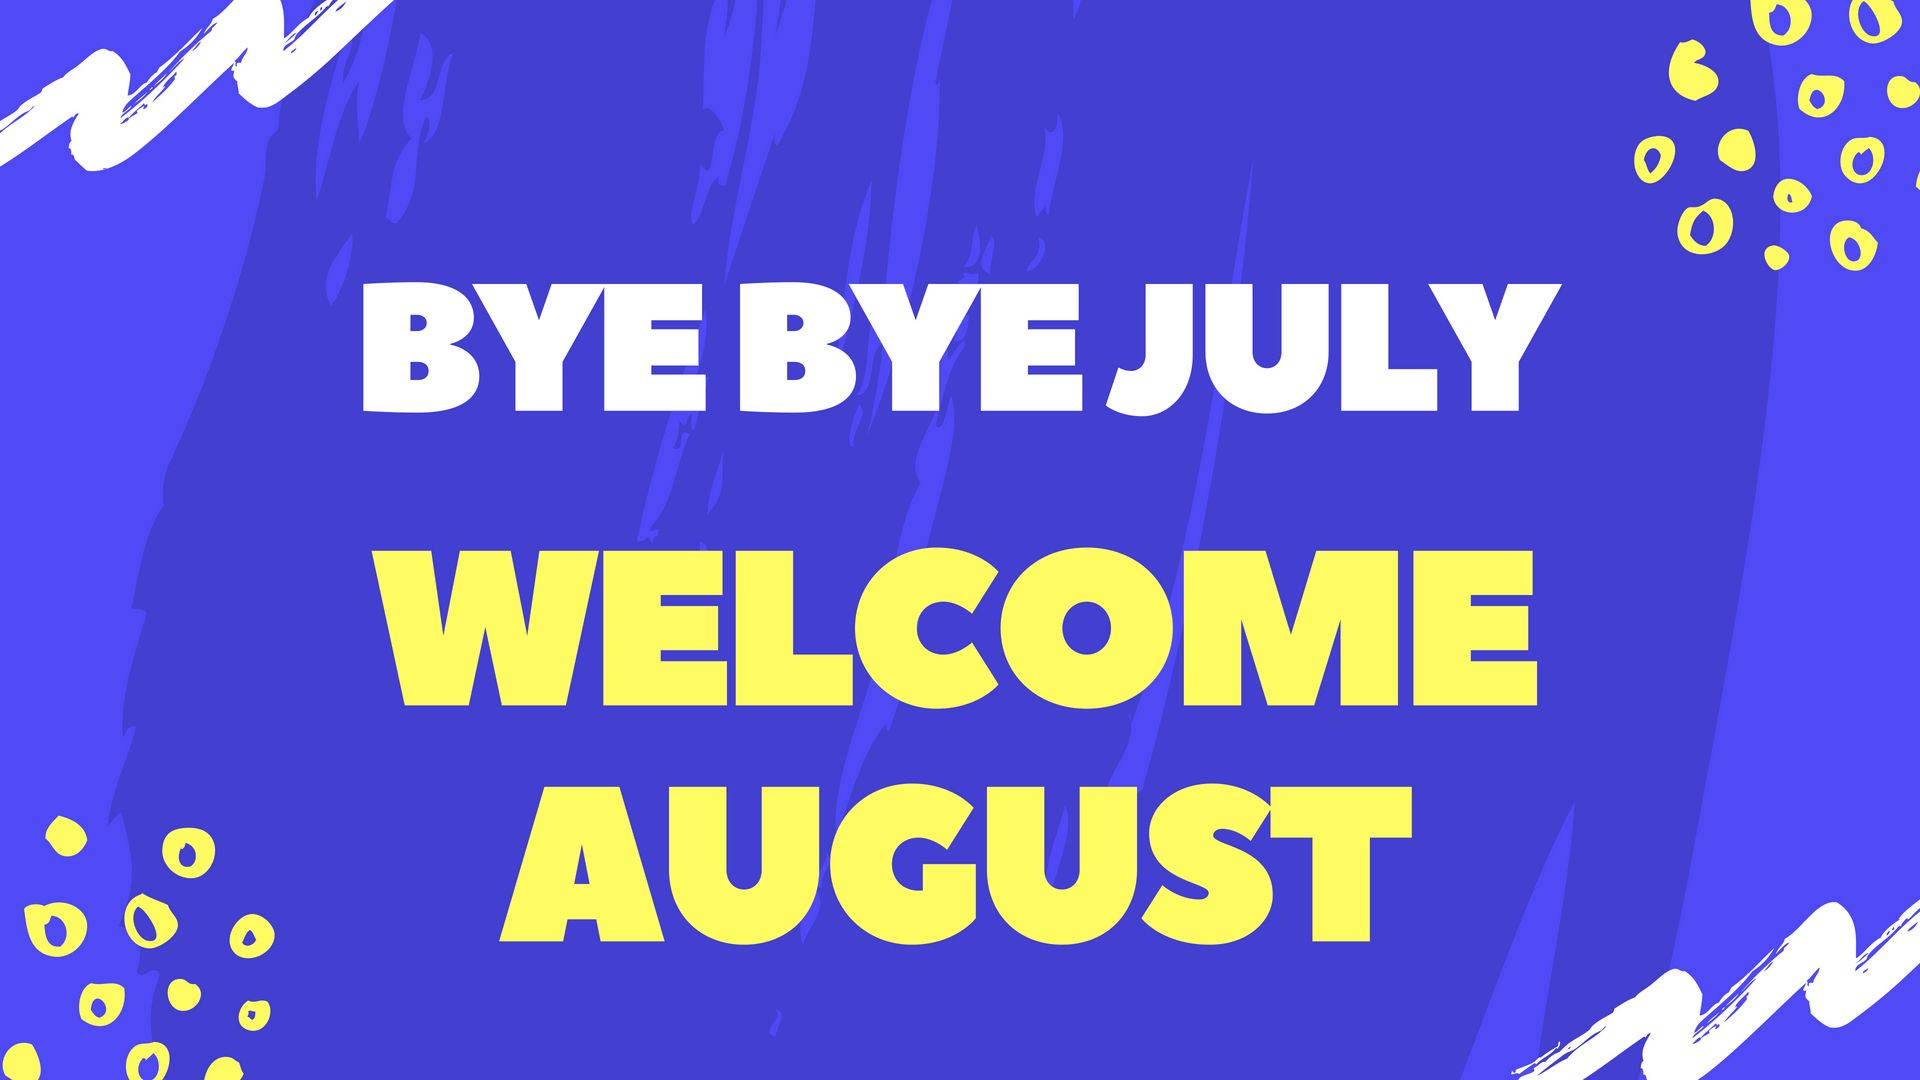 “welcome, August!”